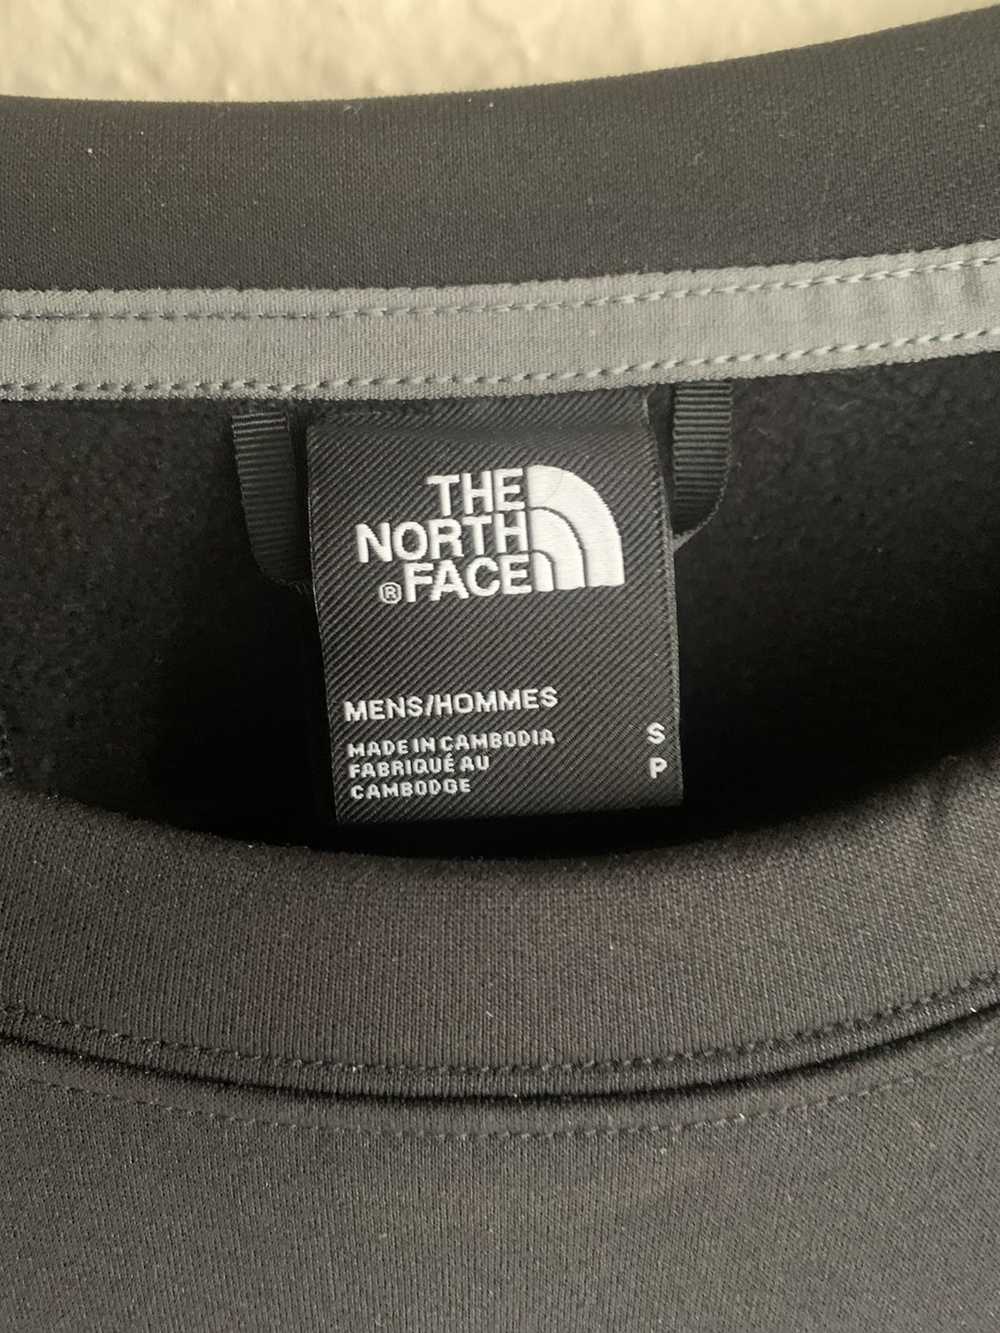 The North Face The north face sweatshirt - image 2